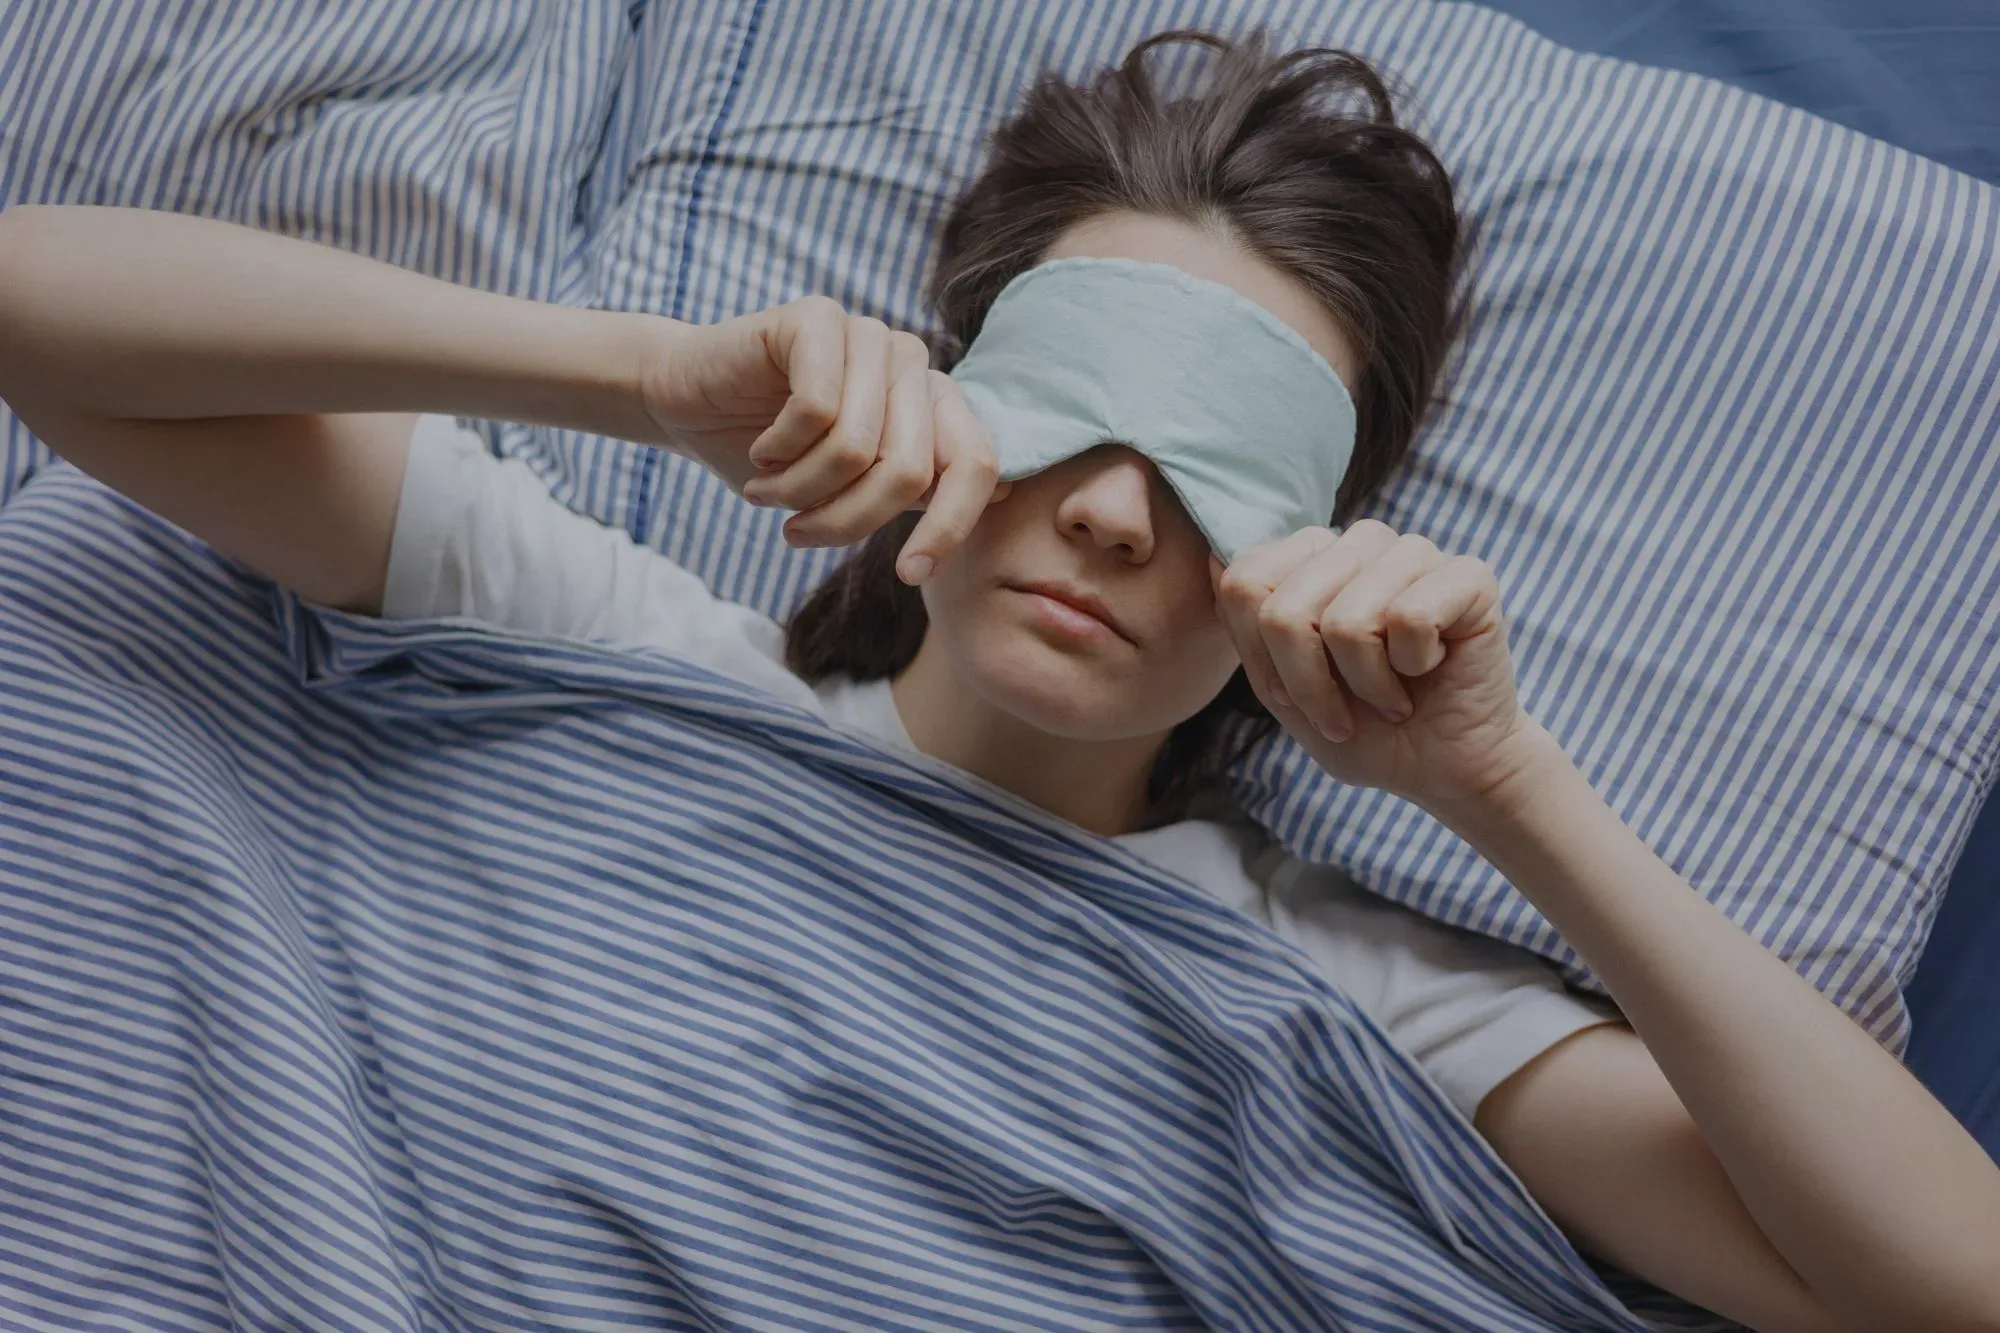 A woman covering her eyes before sleep after a light workout before bed